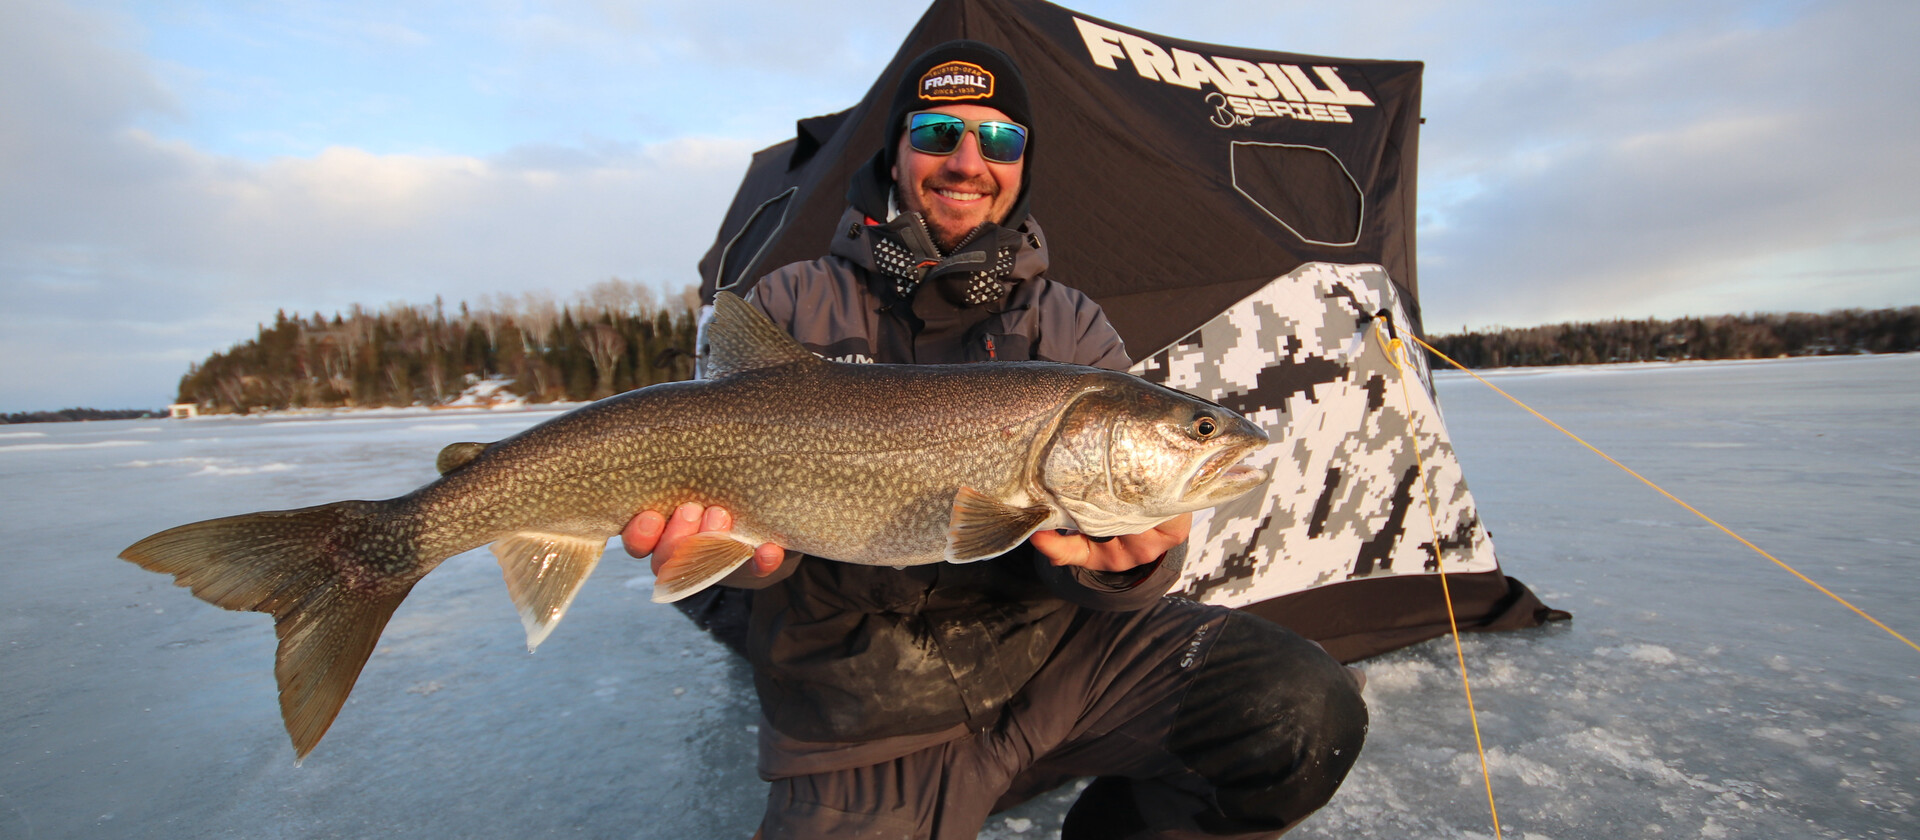 Ultimate Guide to the 8 Best Lakes for Trout Fishing in Canada